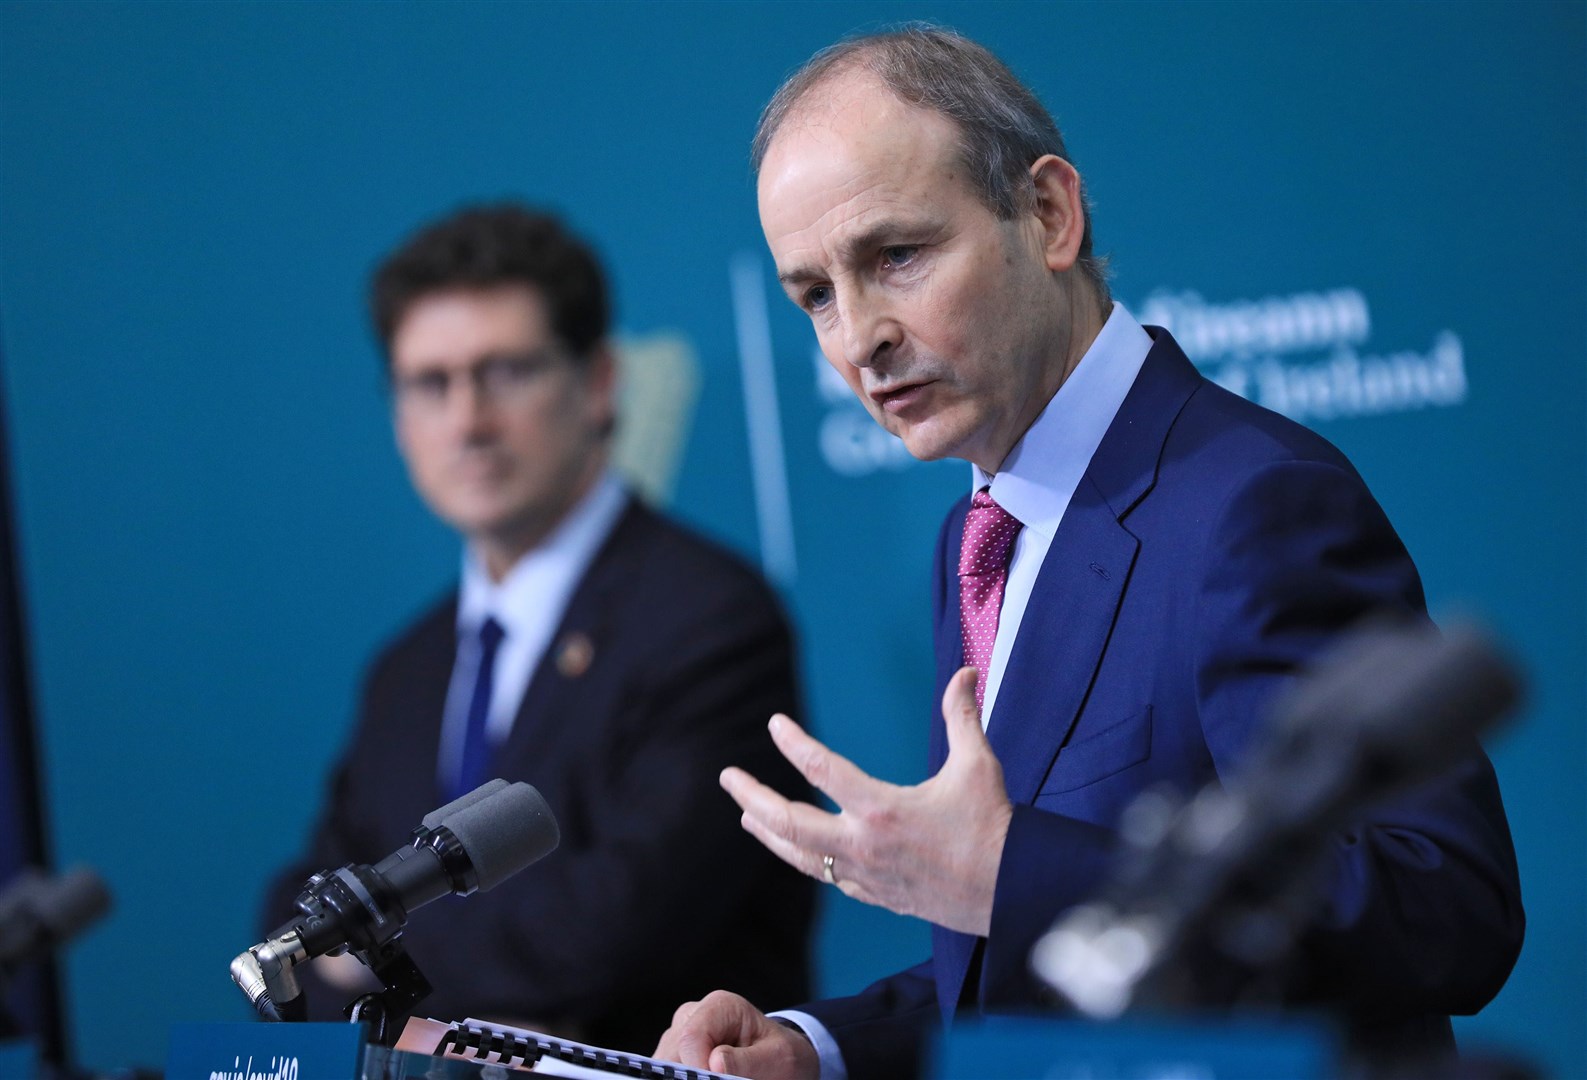 Taoiseach Micheal Martin during a joint press conference at Government Buildings in Dublin (Julien Behal Photography/PA)